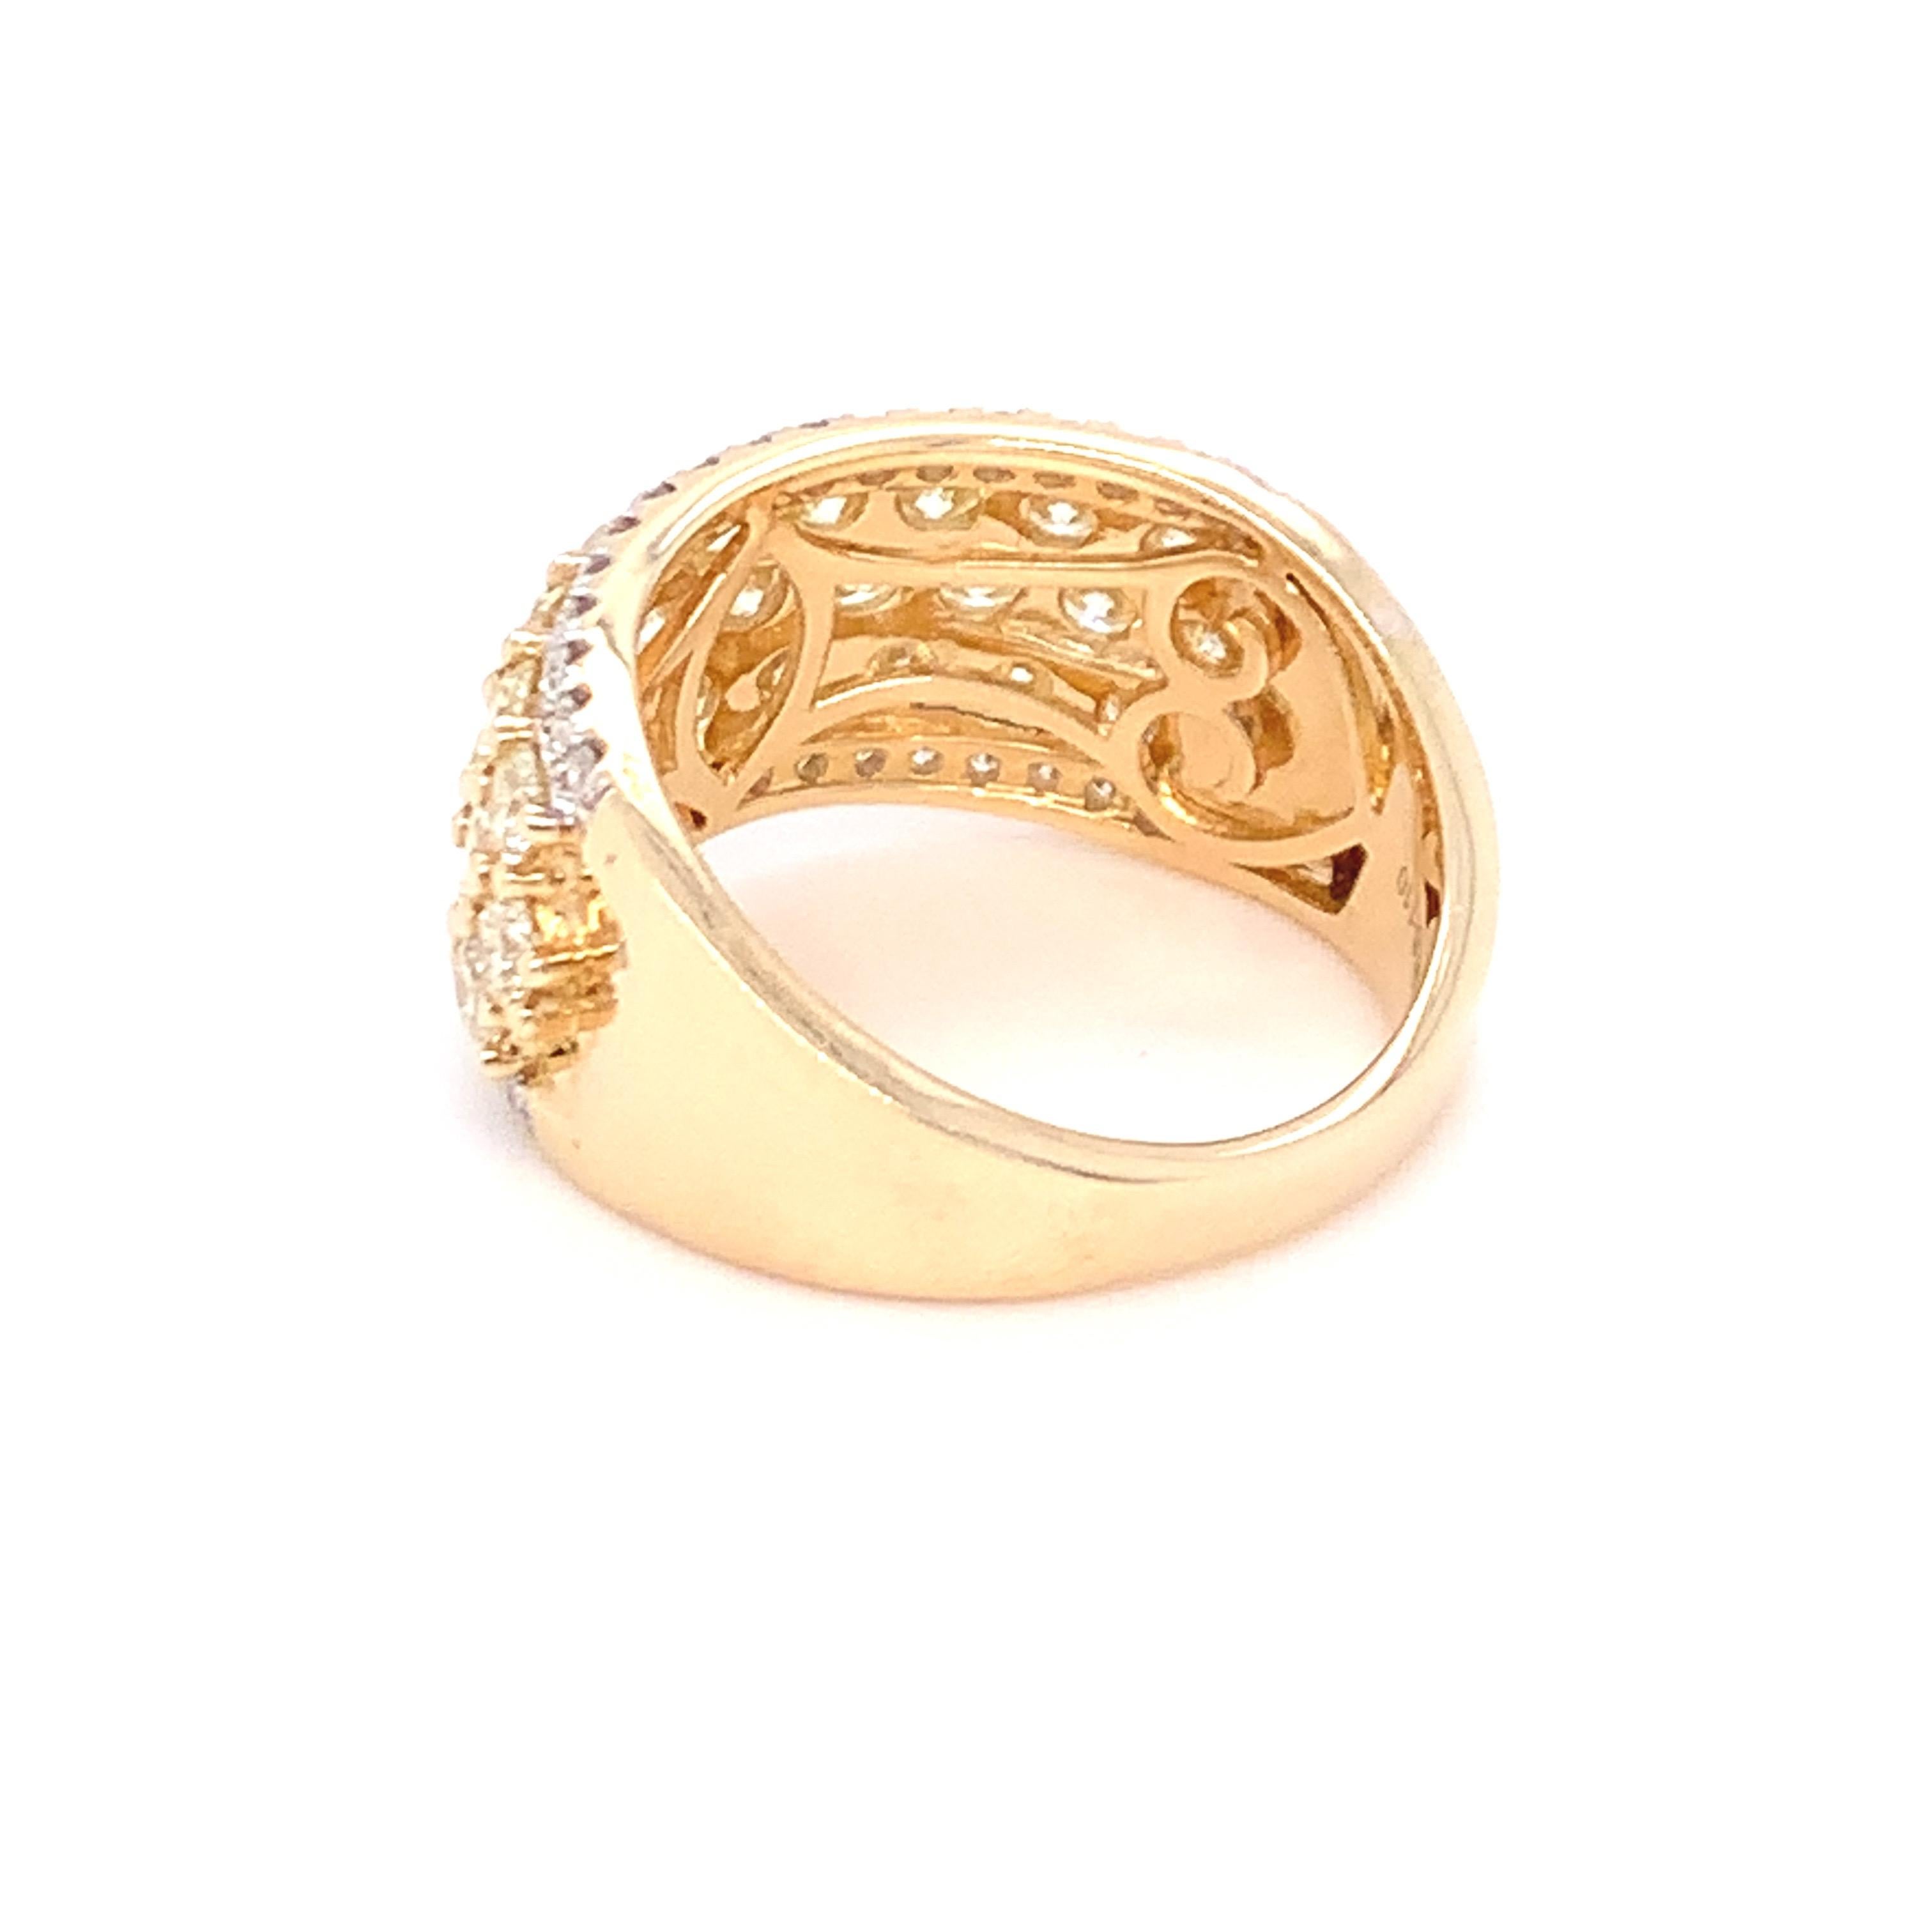 2.50 Carat Yellow & White Diamond Band Ring in 14k Yellow Gold For Sale 13